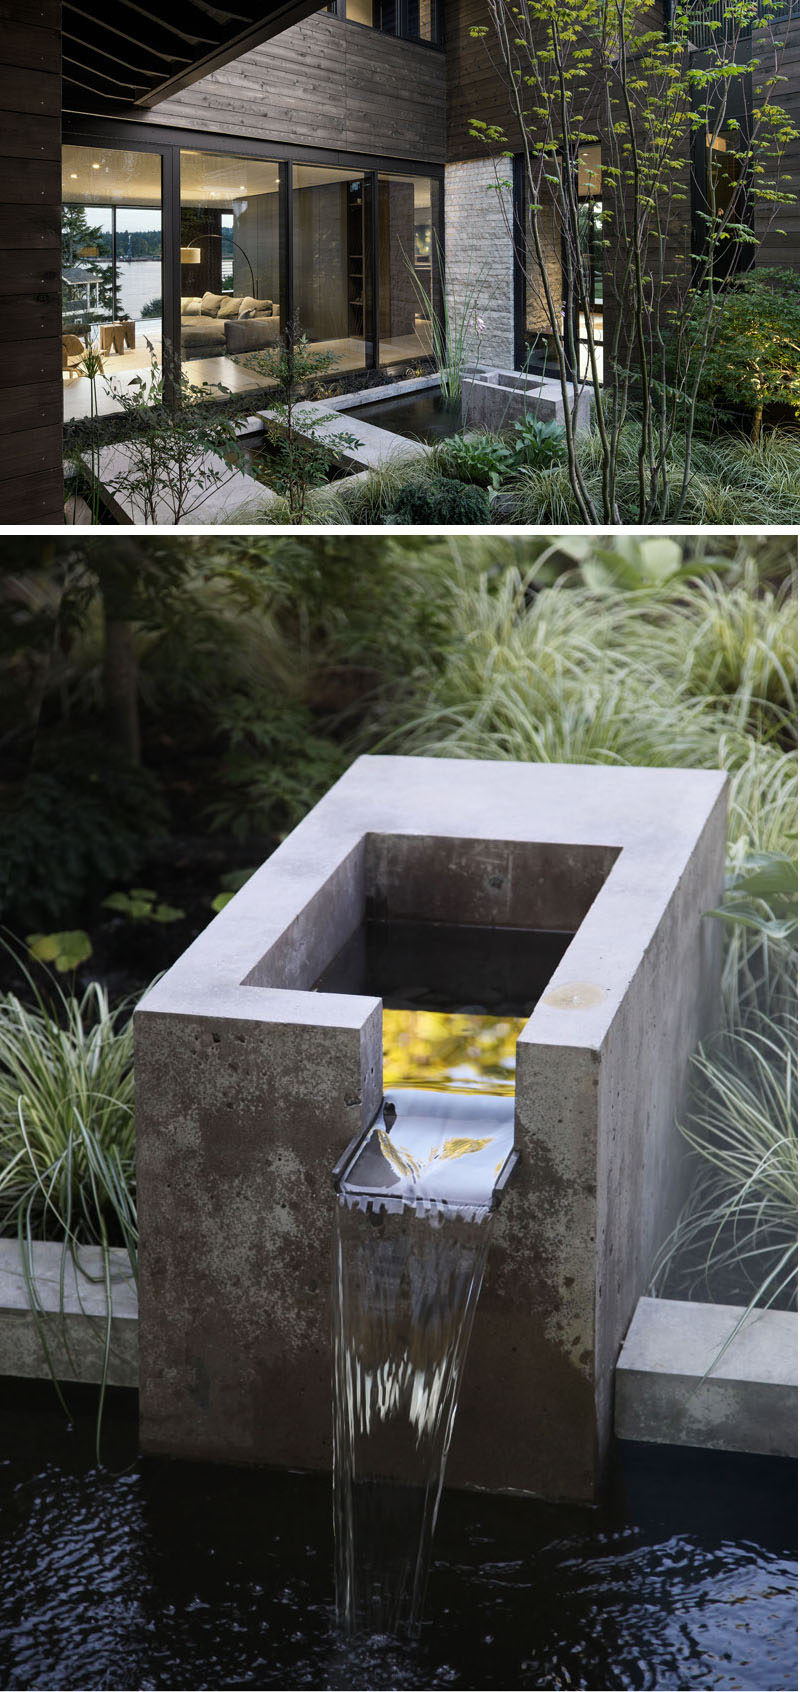 In this small and modern courtyard, there's a concrete water feature and plants that can be viewed from both levels of the home. #Courtyard #Landscaping #WaterFeature